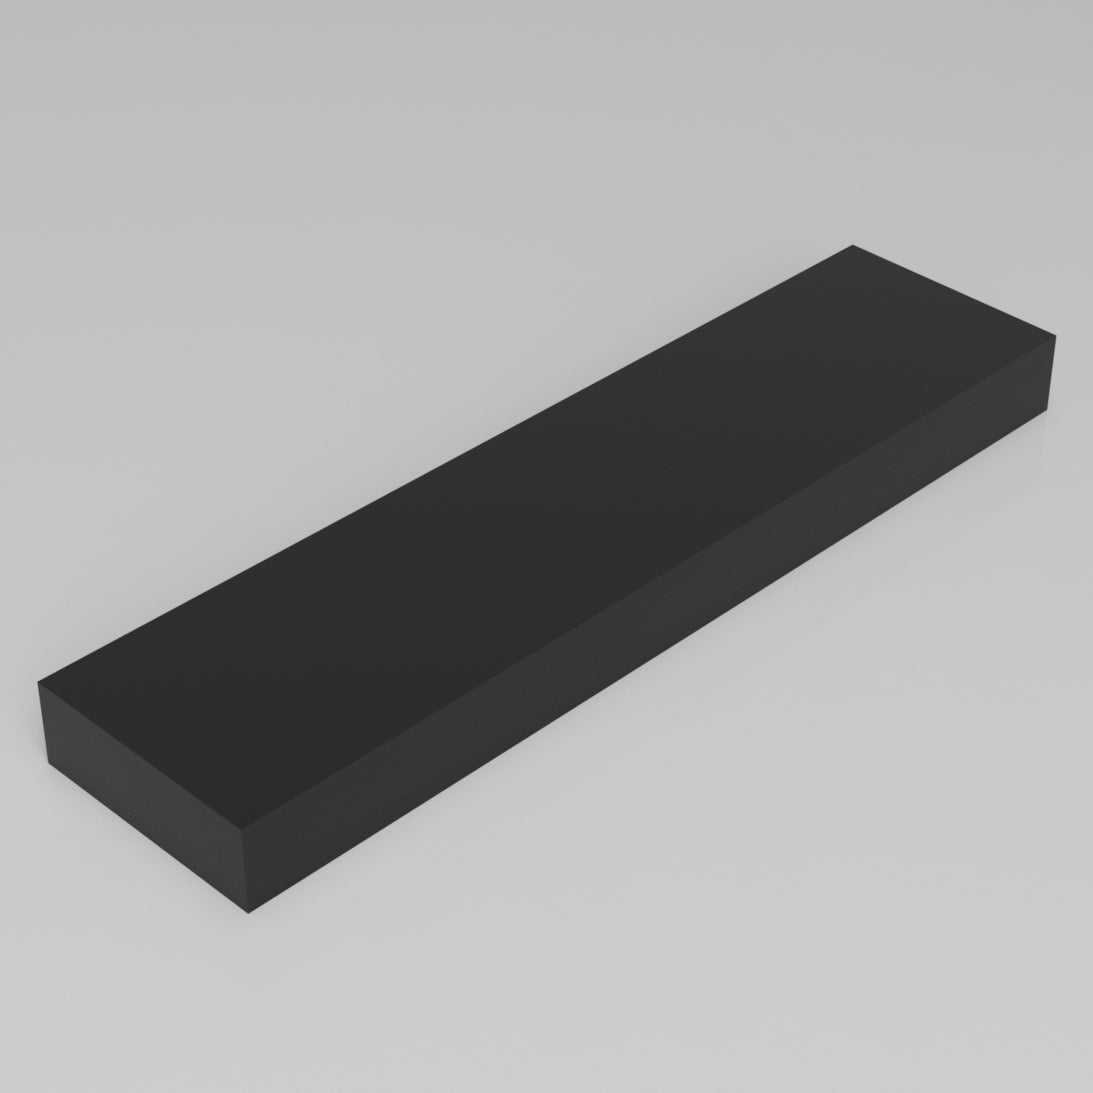 Machinable Wax Rectangular Block Front View 2 Inch by 6 Inch by 24 Inch